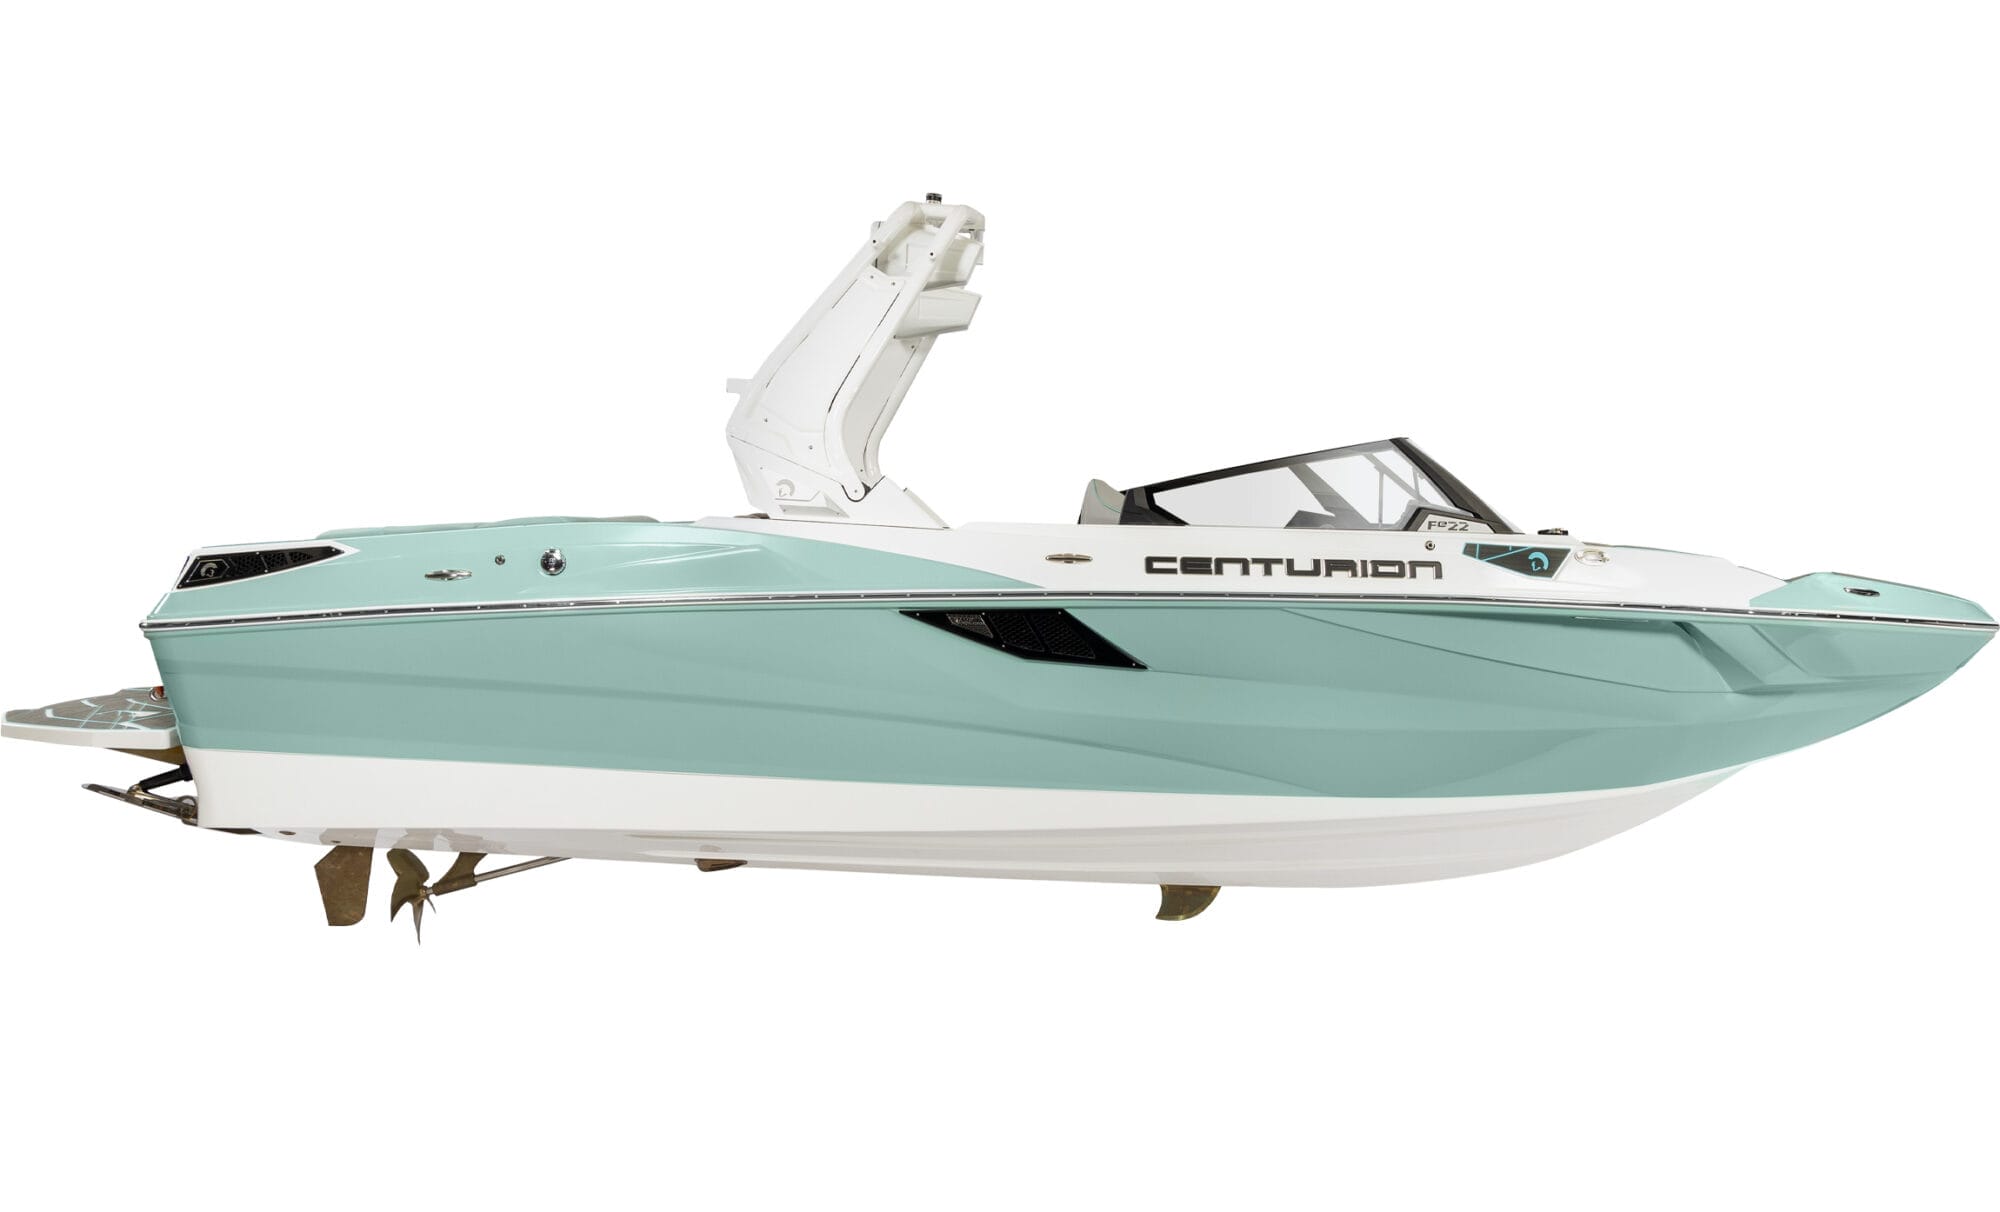 A Centurion Fe22 boat on a white background.